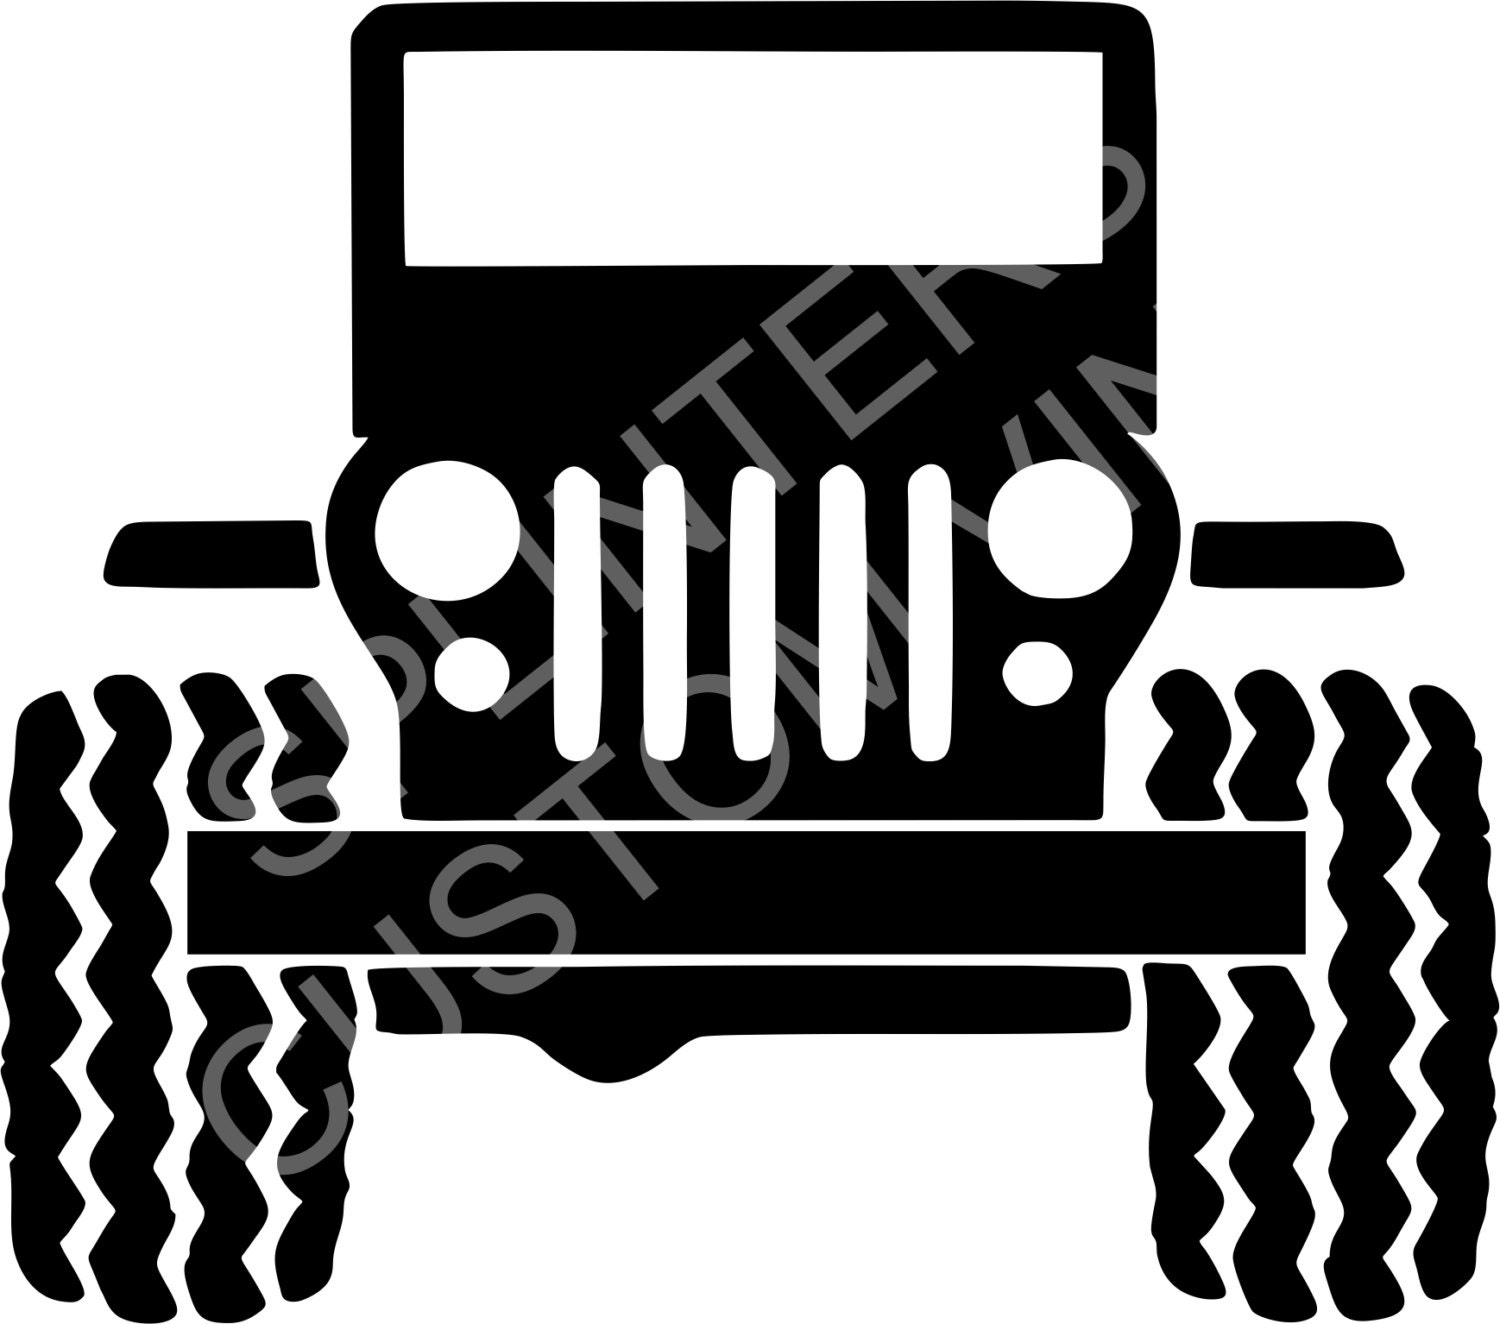 Jeep SVG and PNG File from SplintersCustomWood on Etsy Studio